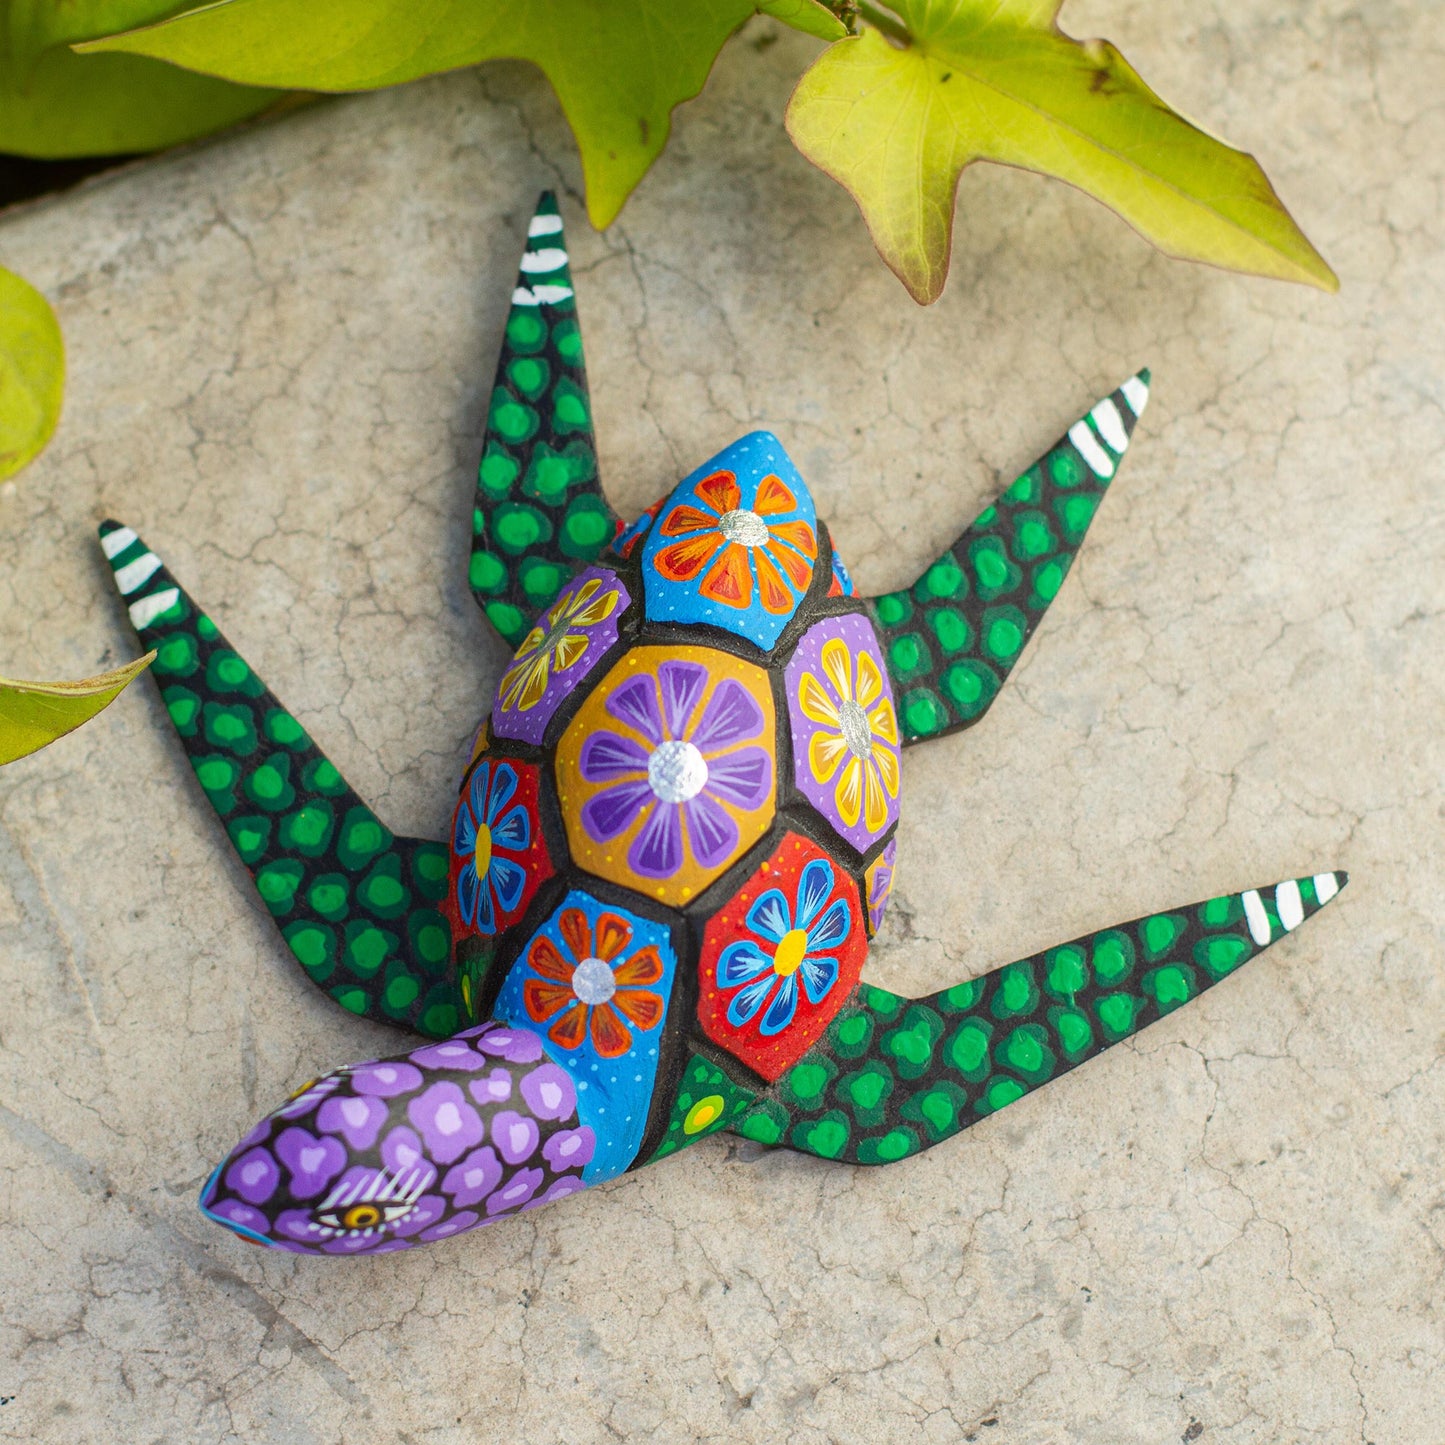 Psychedelic Turtle Hand Painted Alebrije Turtle Wood Sculpture from Mexico